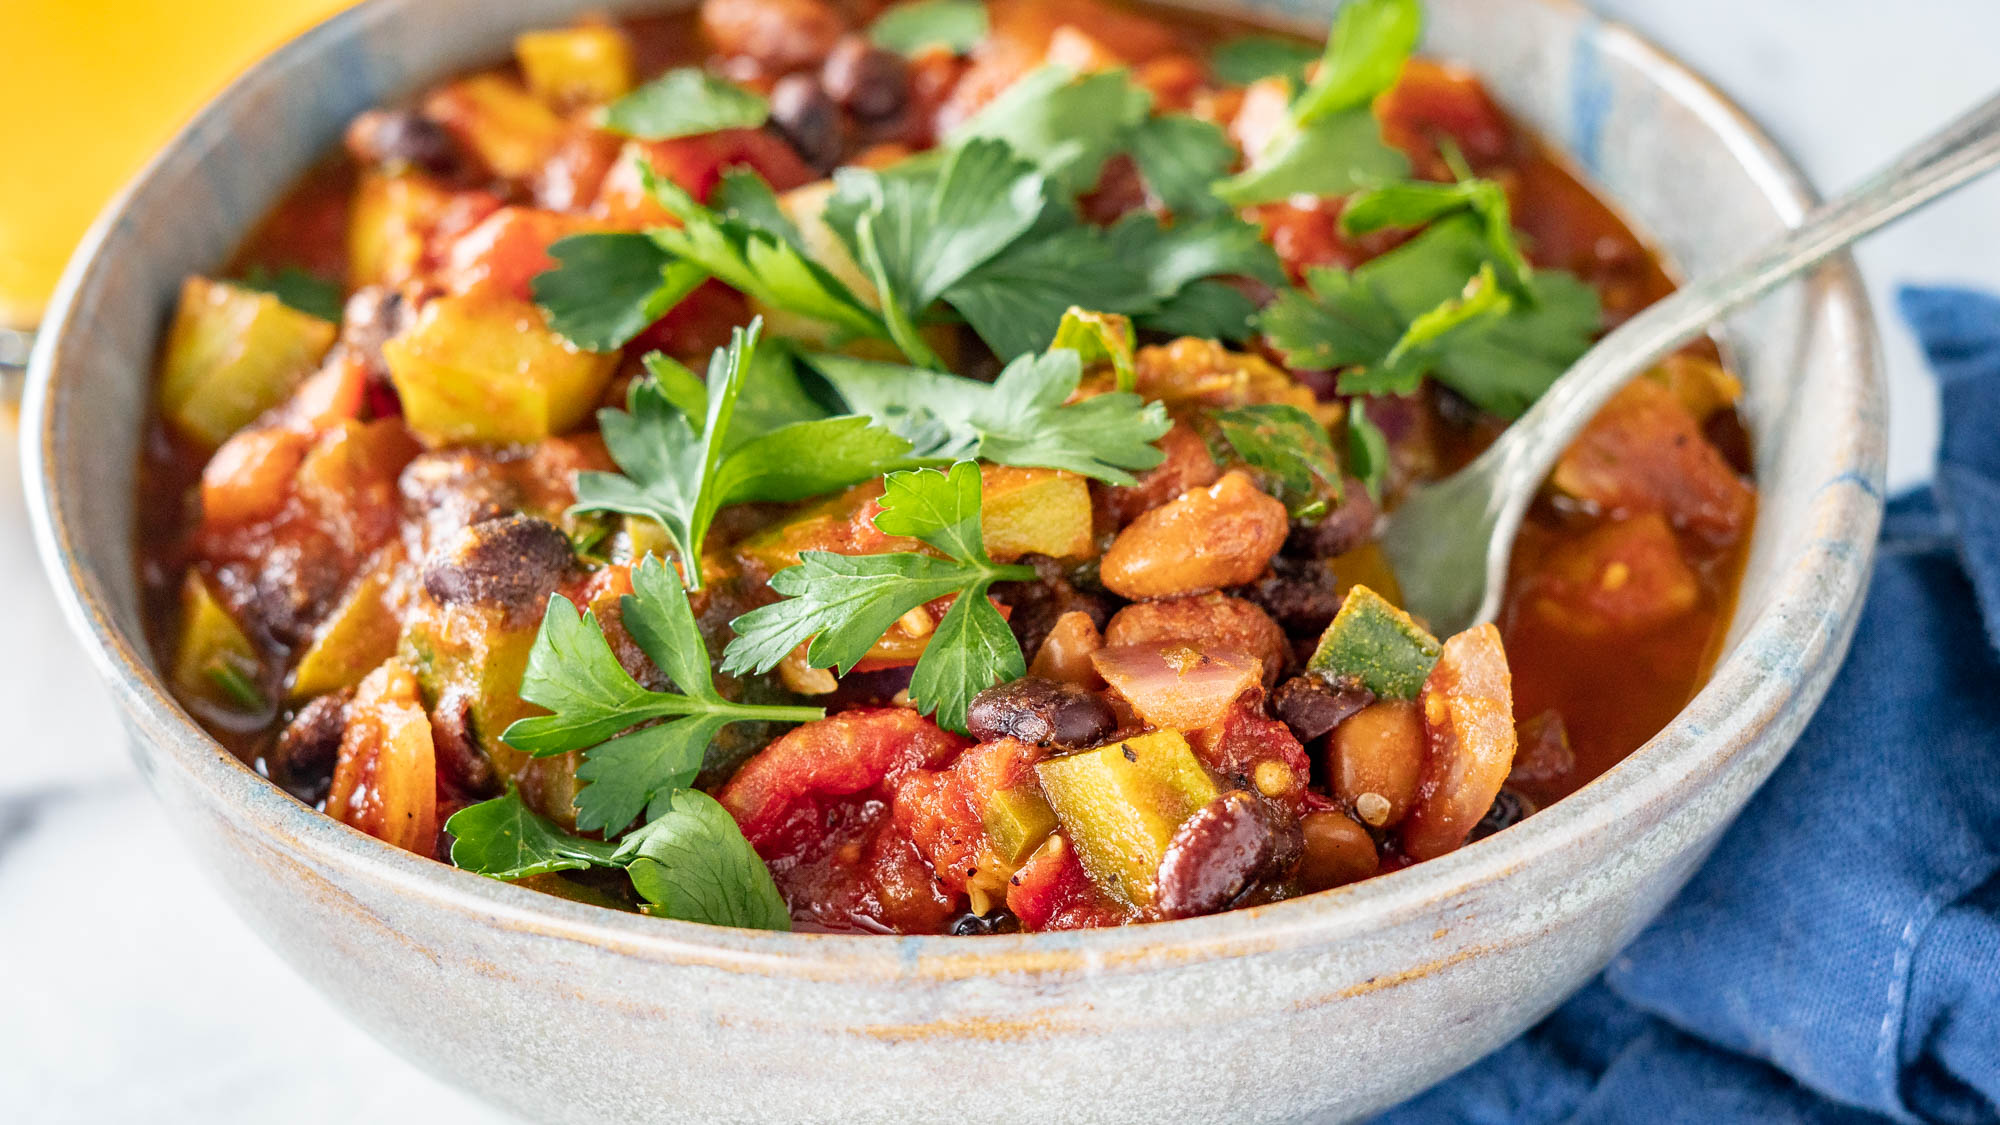 "This hit the spot for my craving for a good vegetarian chili. 